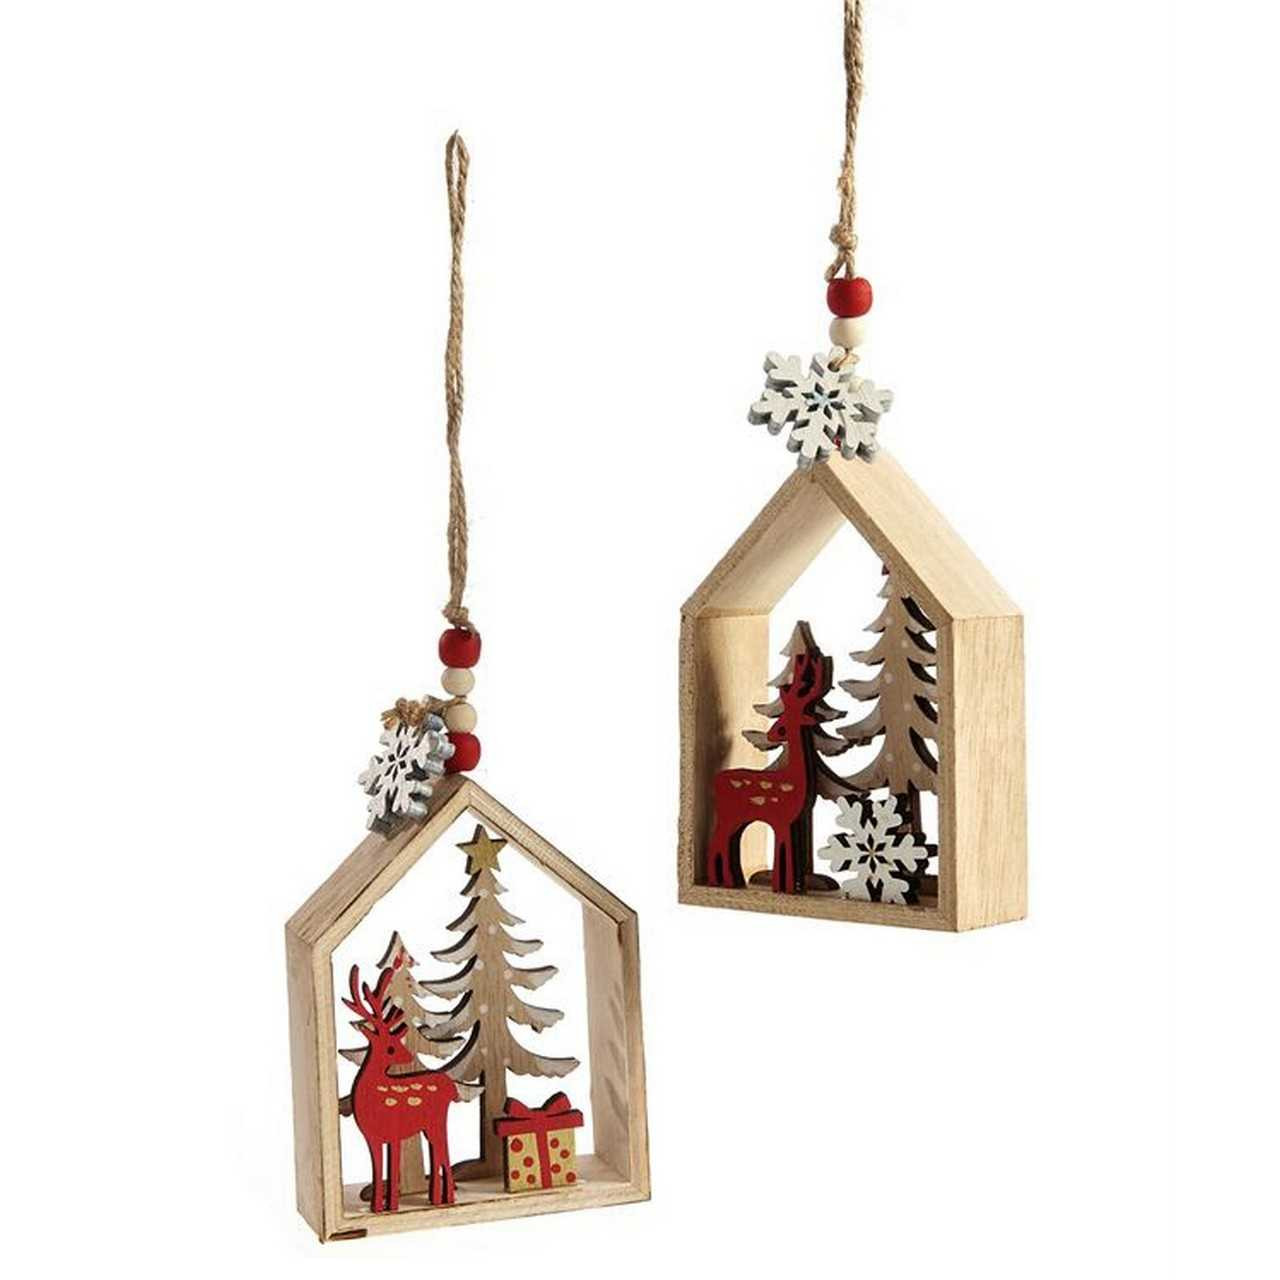  Gerrii 48 Pieces Christmas Wooden Ornaments Hanging